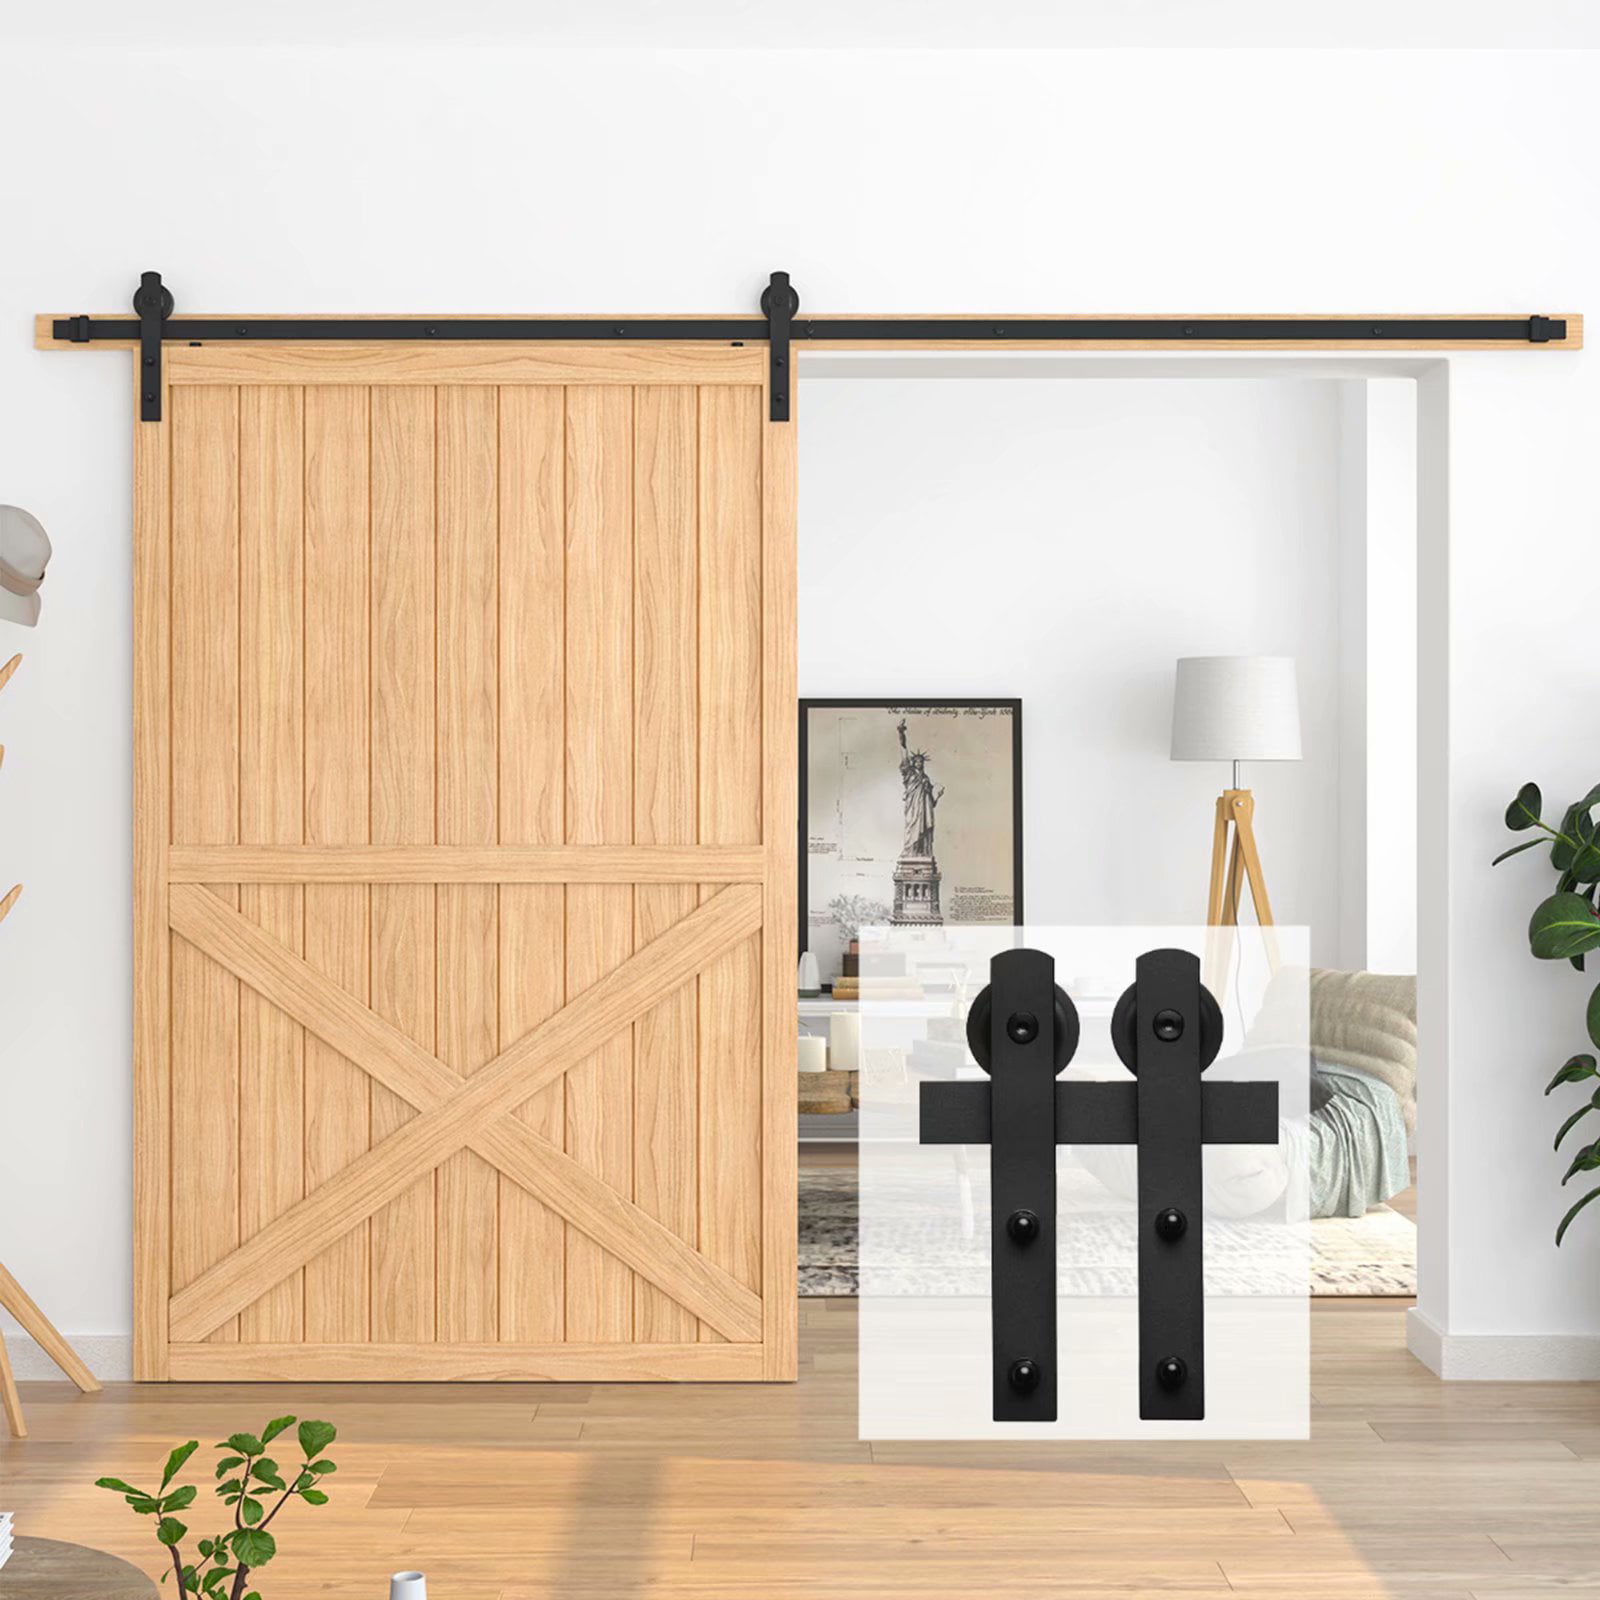 I Shape Hangers Simple and Easy to Install HomLux 5ft Heavy Duty Sturdy Sliding Barn Door Hardware Kit Single Rail Smoothly and Quietly Fit 1 3/8-1 3/4 Thickness Door Panel 